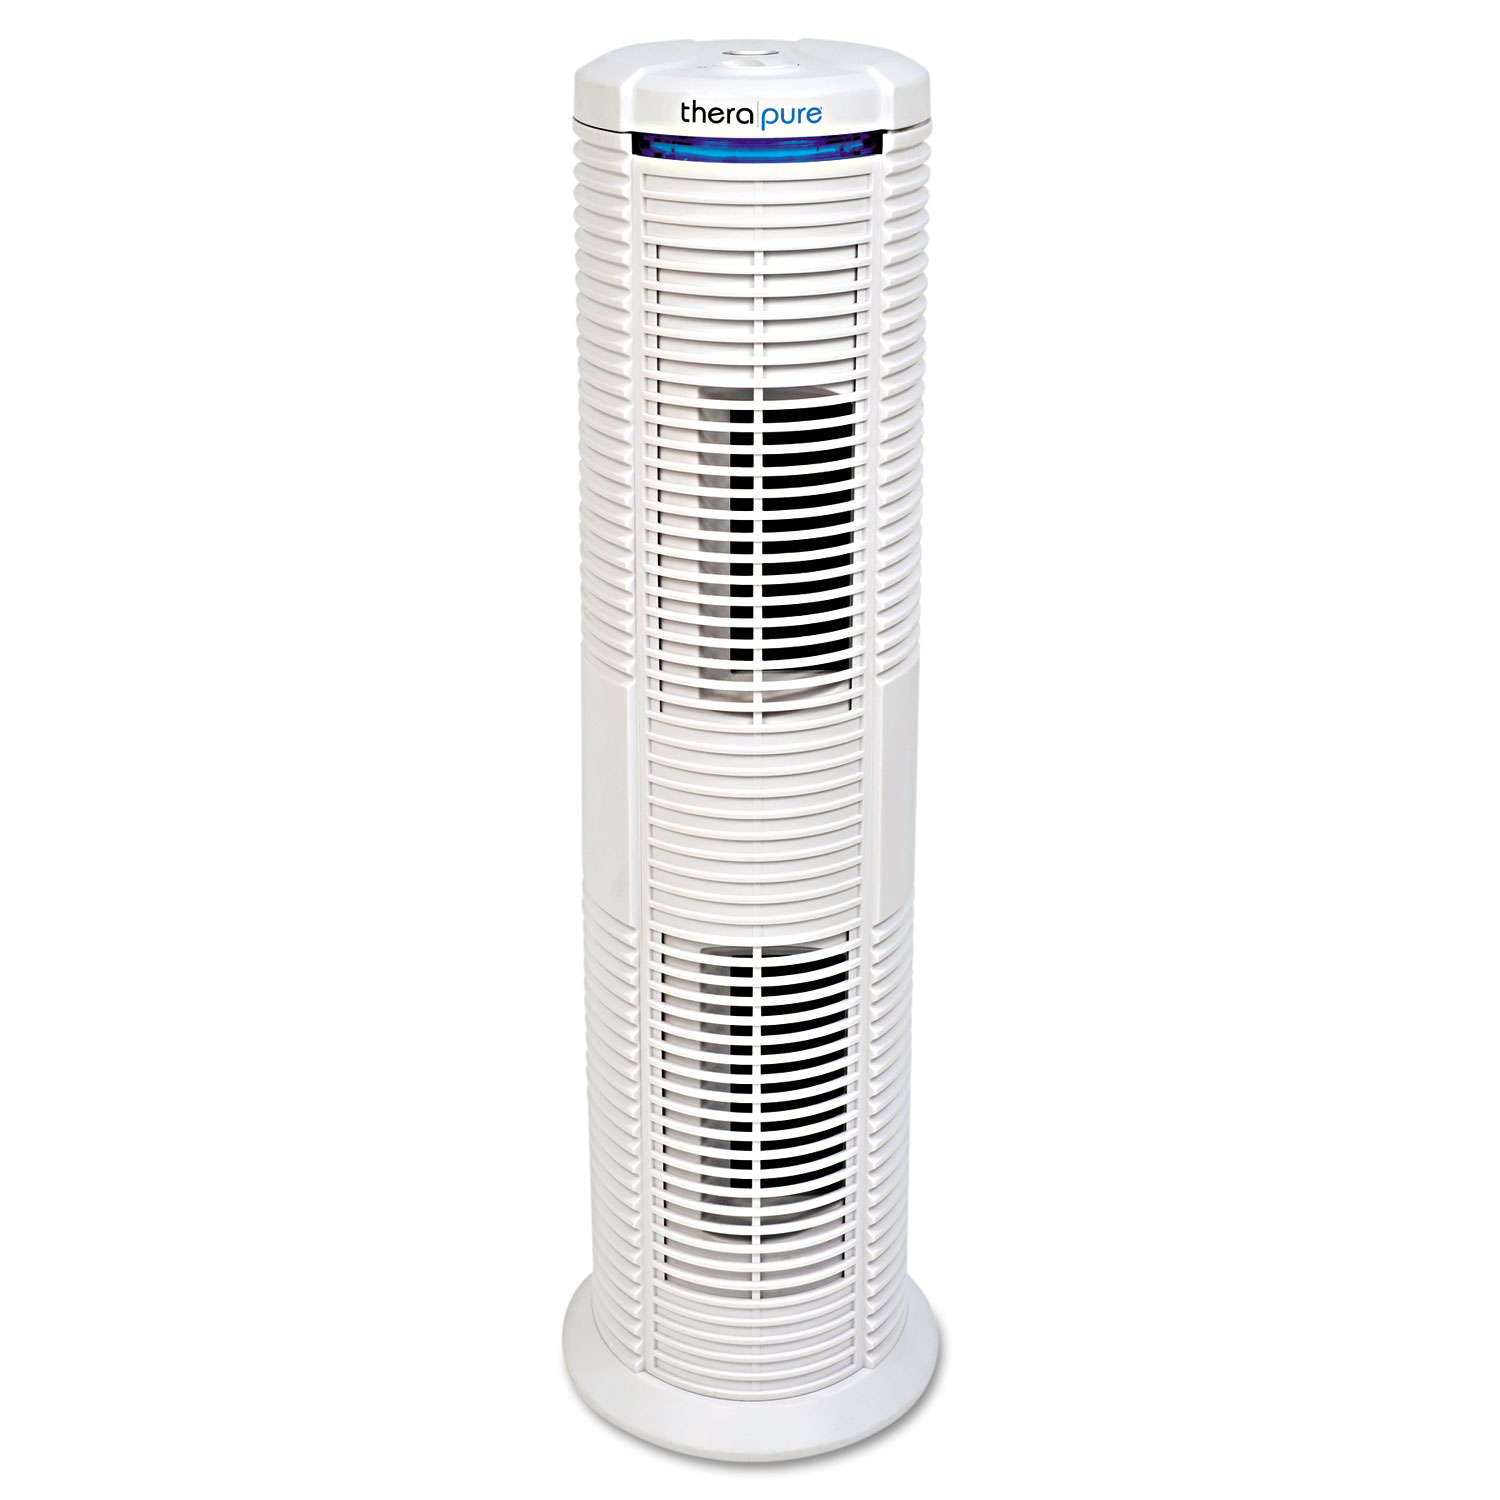  Therapure 90TP230TWH01 TPP230M HEPA-Type Air Purifier, 183 sq ft Room Capacity, White (ION90TP230TWH01) 